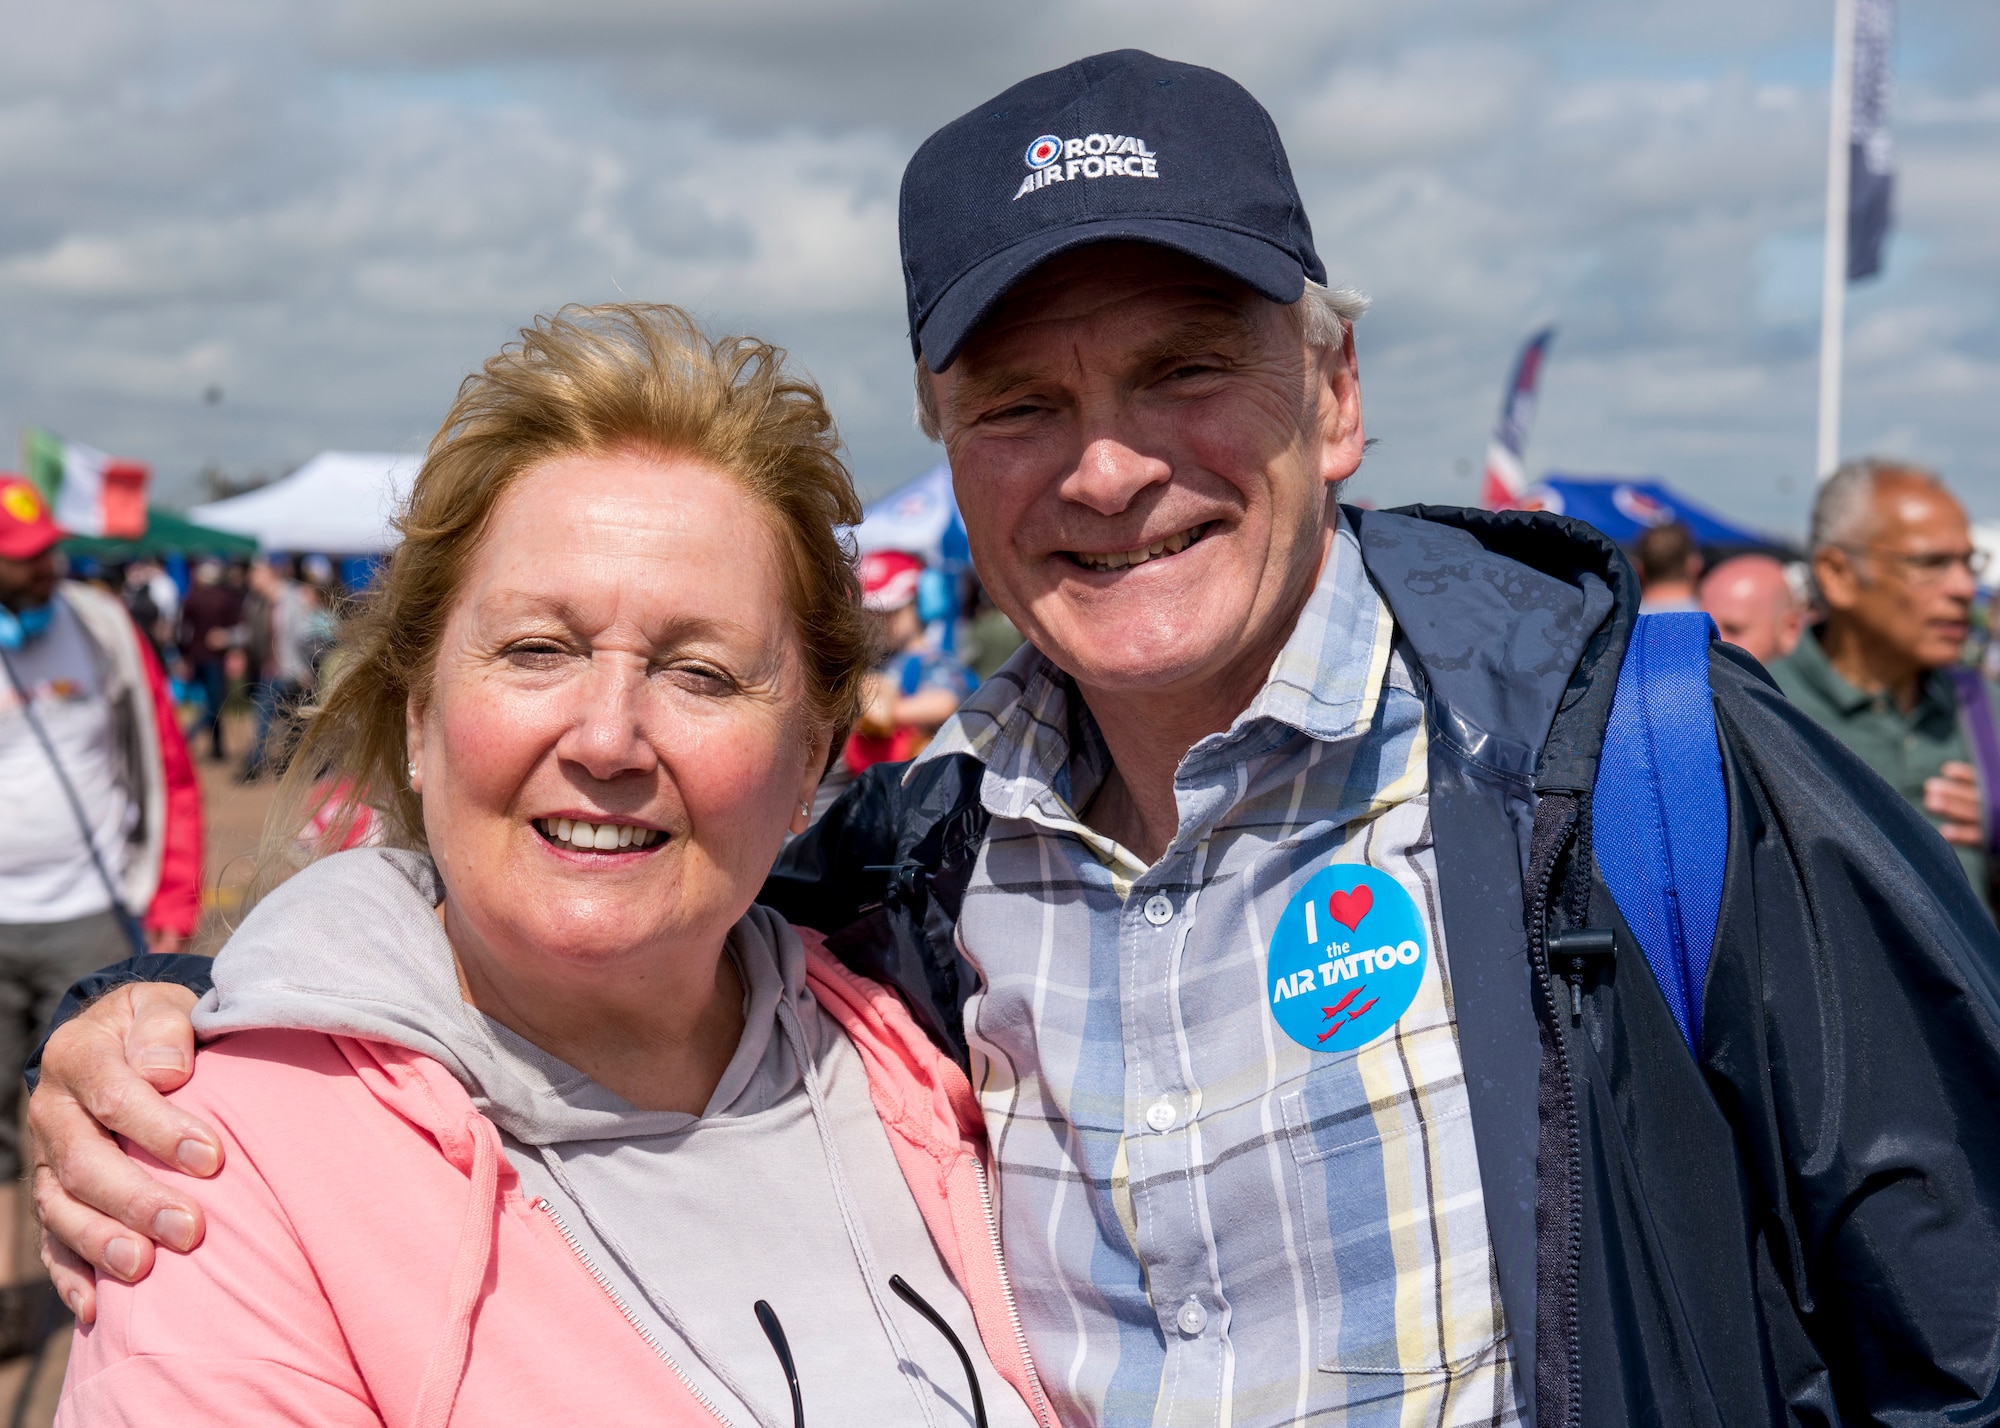 Squadron leader Clive Wood, RAF Alconbury and RAF Molesworth RAF commander, and partner Clare Lawrence, pose for a photo during the 2019 Royal International Air Tattoo at RAF Fairford, England, July 20, 2019. RAF Alconbury, RAF Molesworth and RAF Fairford make up three of the seven bases under the control of the U.S. Air Force’s 501st Combat Support Wing. (U.S. Air Force photo by Airman 1st Class Jennifer Zima)